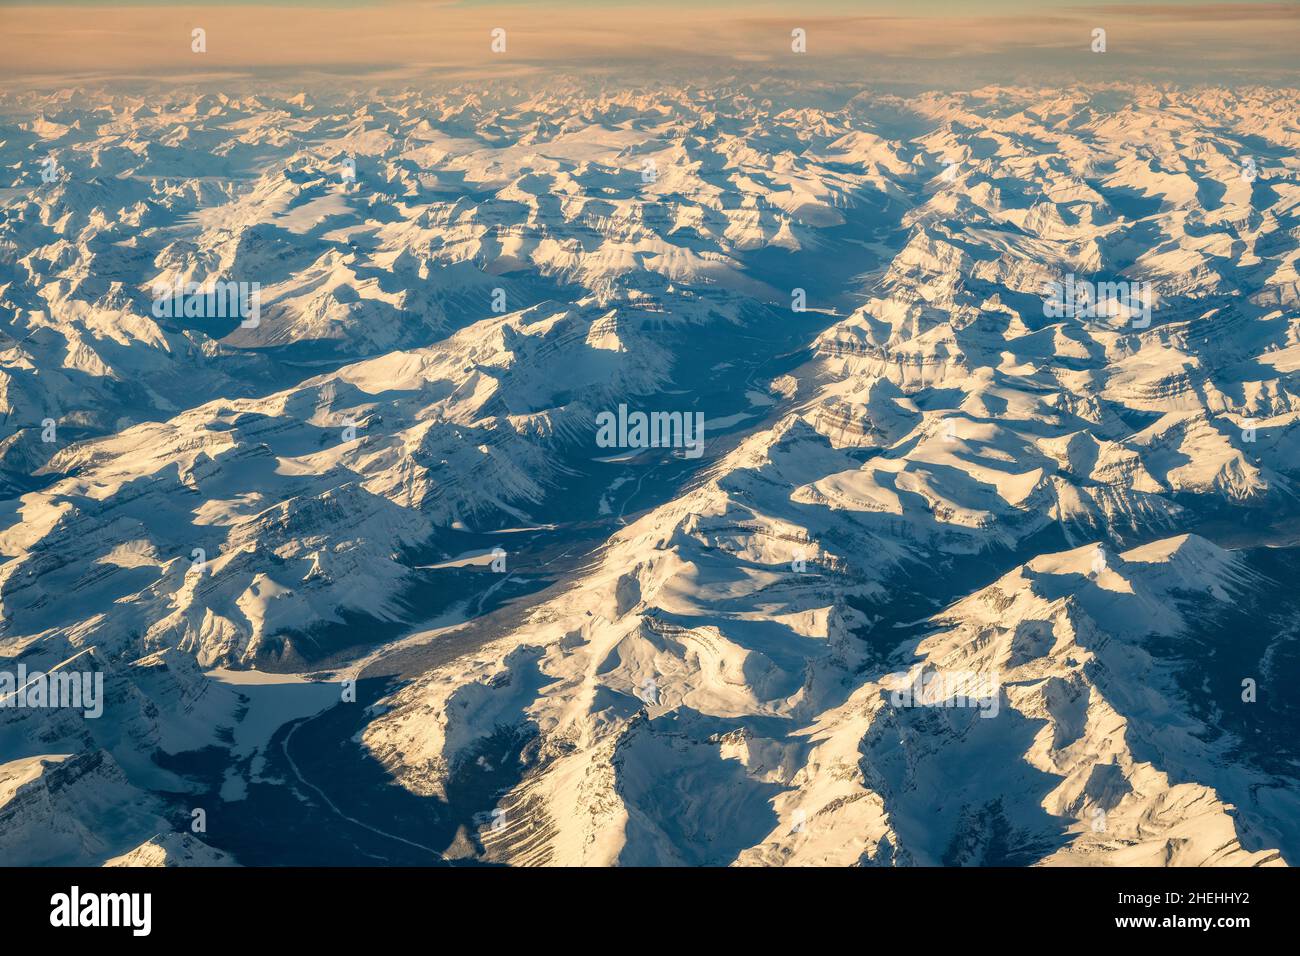 Winter aerial view over the snowy Canadian Rockies mountains, Alberta, Canada Stock Photo